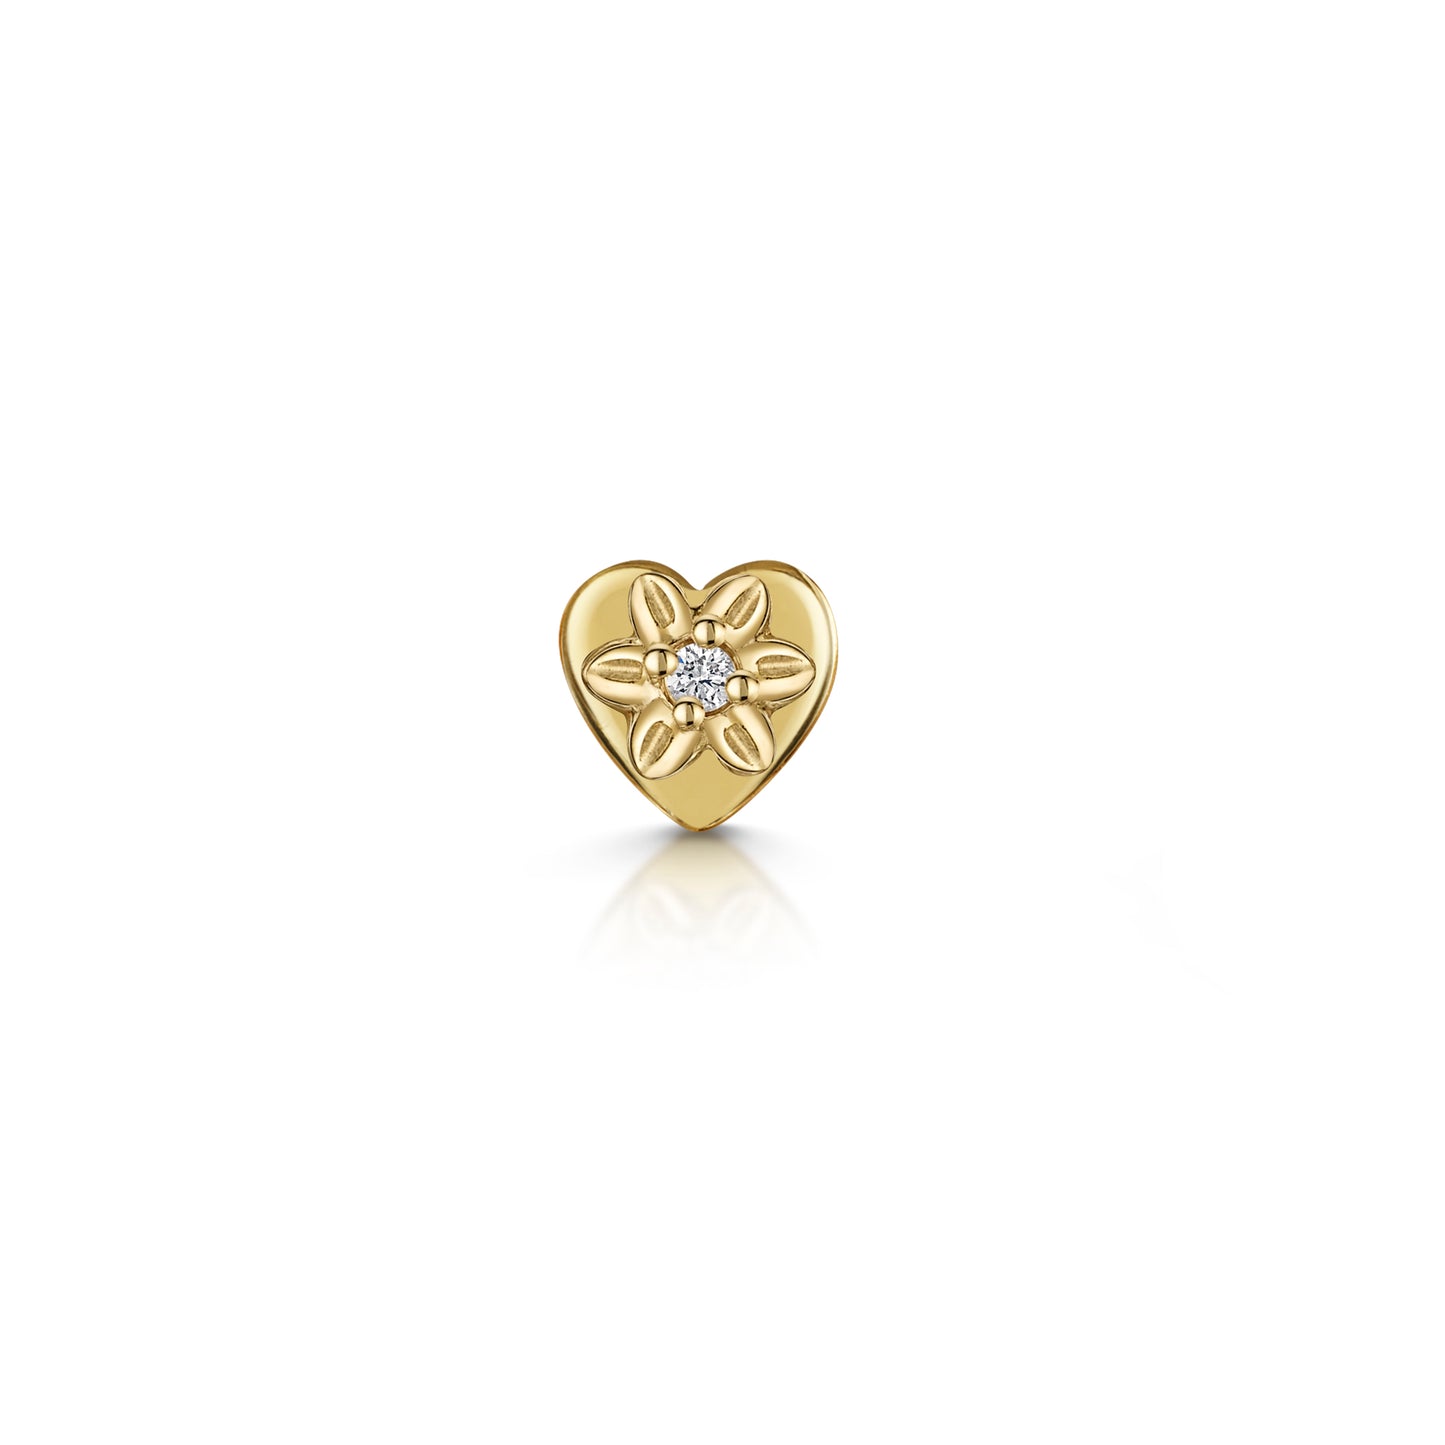 14k solid yellow gold Forget Me Not tiny flower flat back labret stud earring 8mm - LAURA BOND jewellery